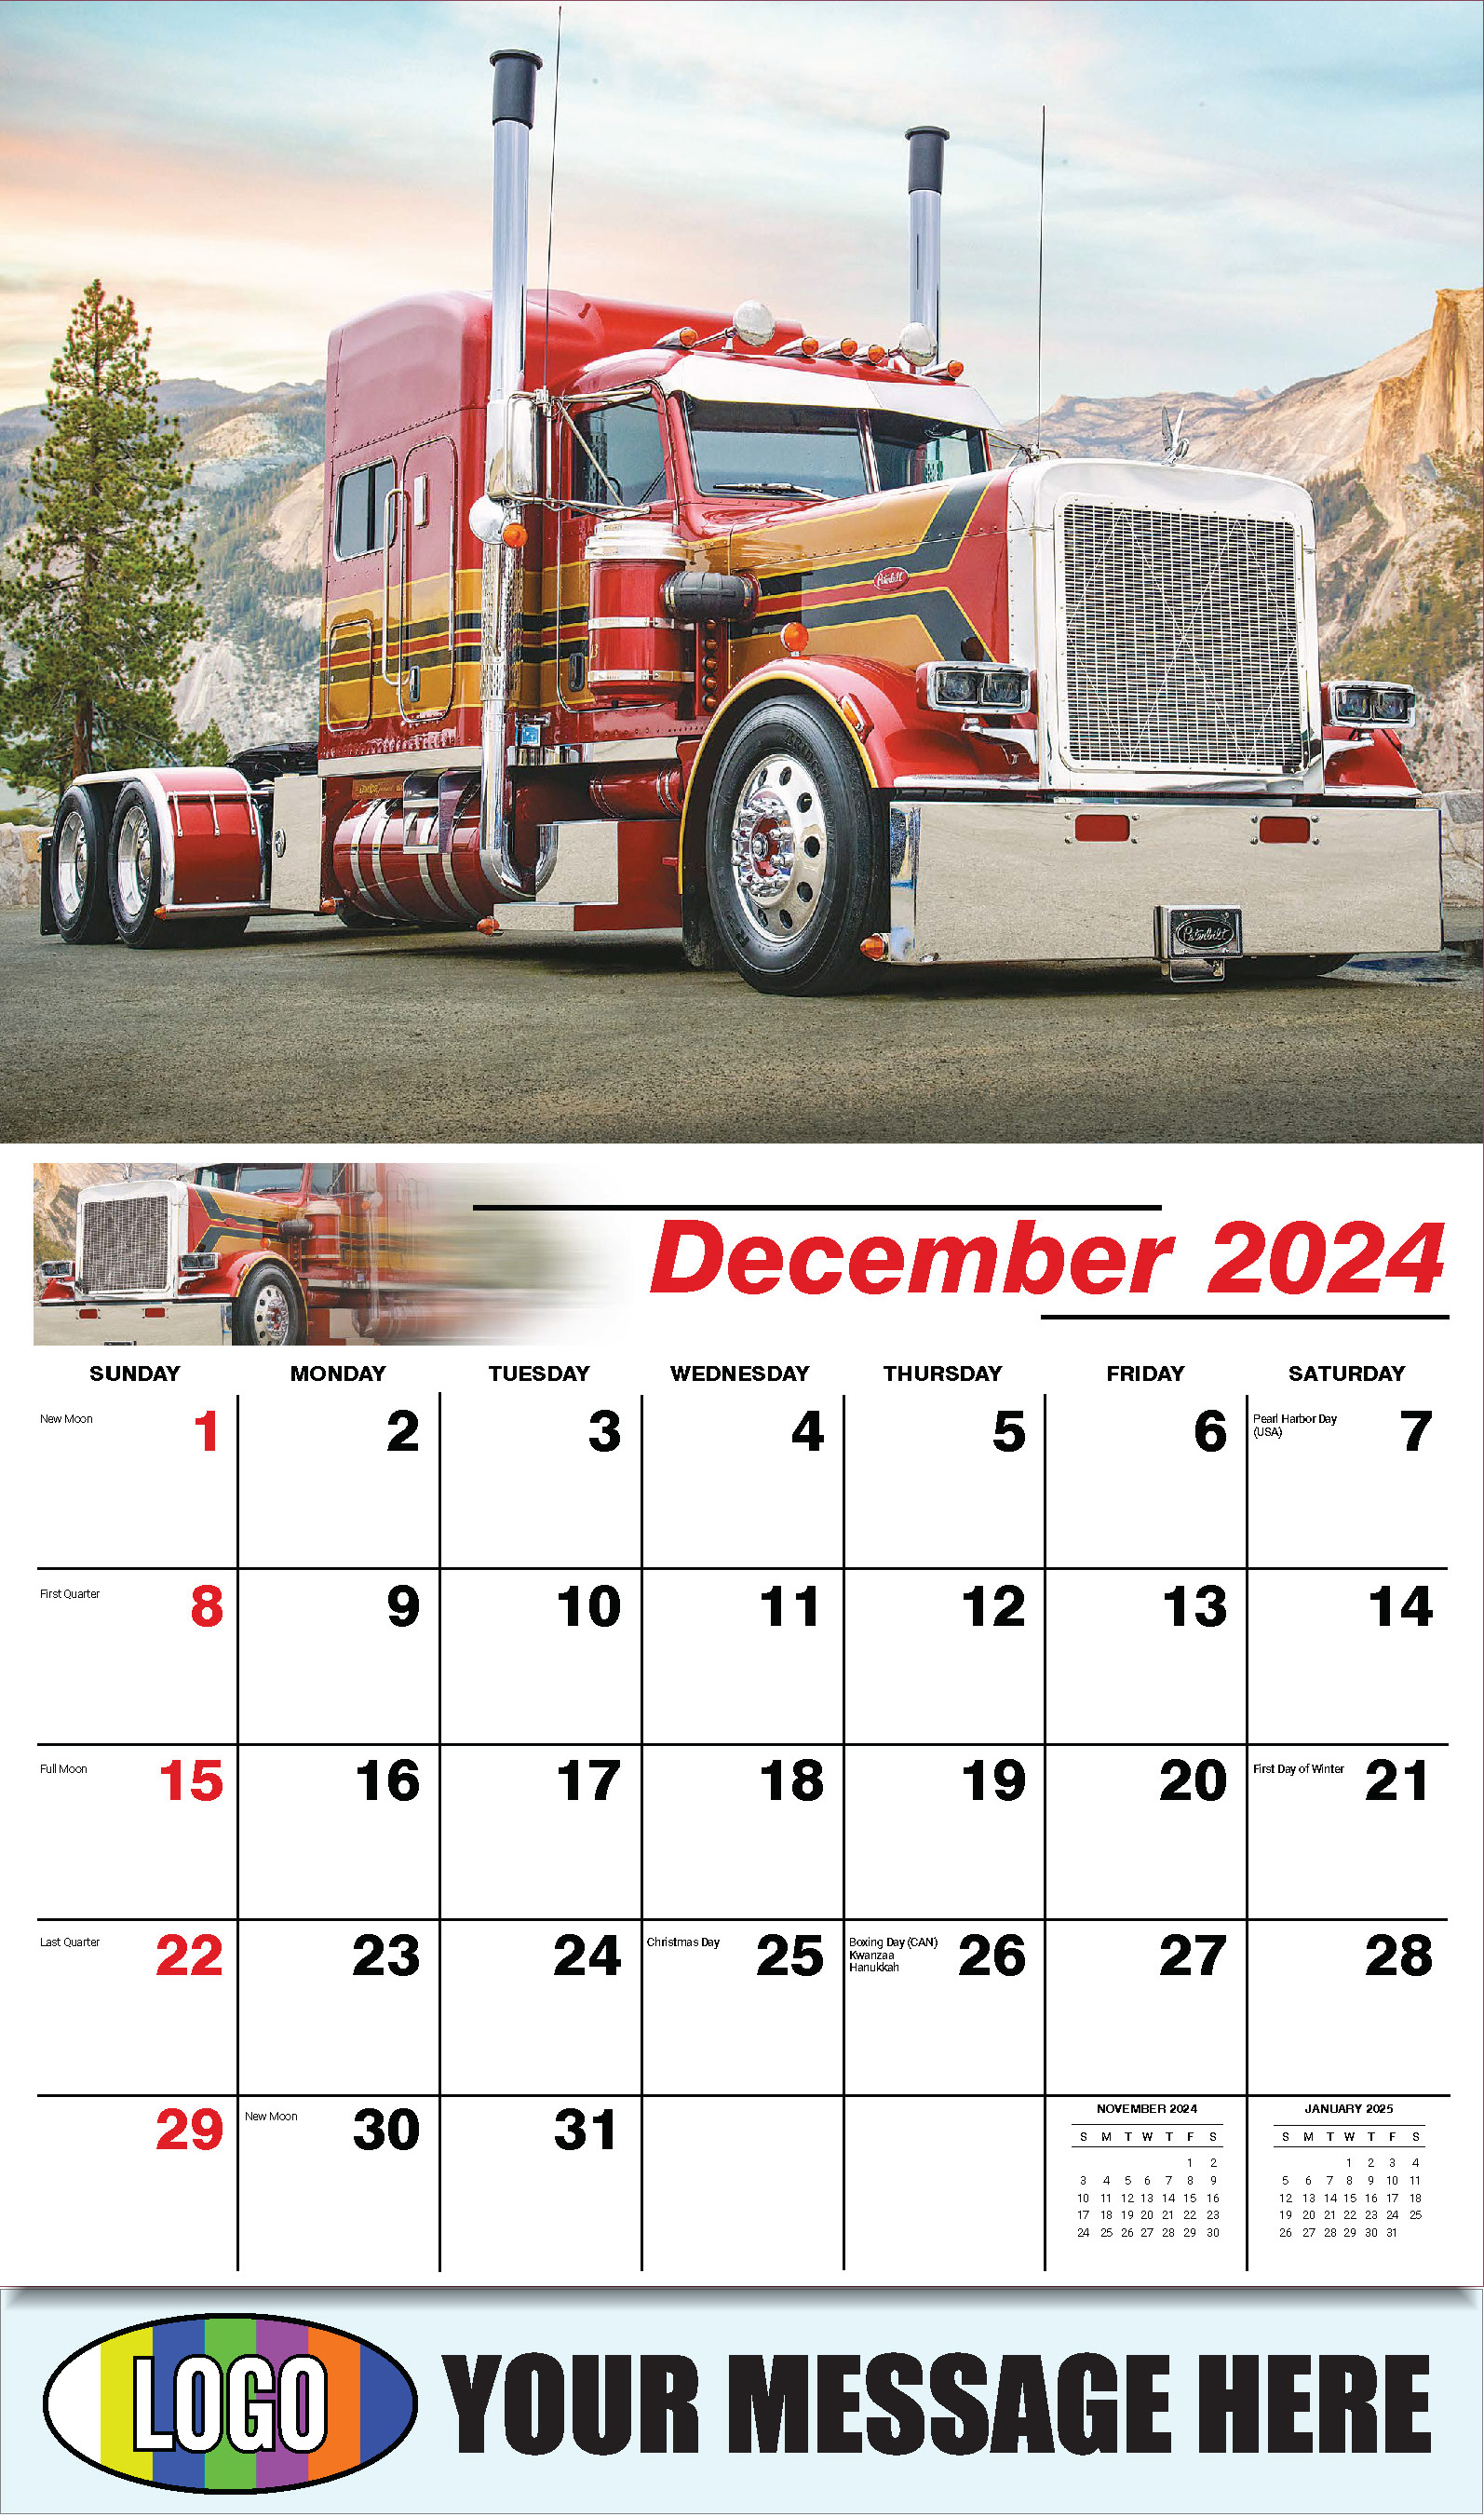 Kings of the Road 2025 Automotive Business Promotional Calendar - December_a